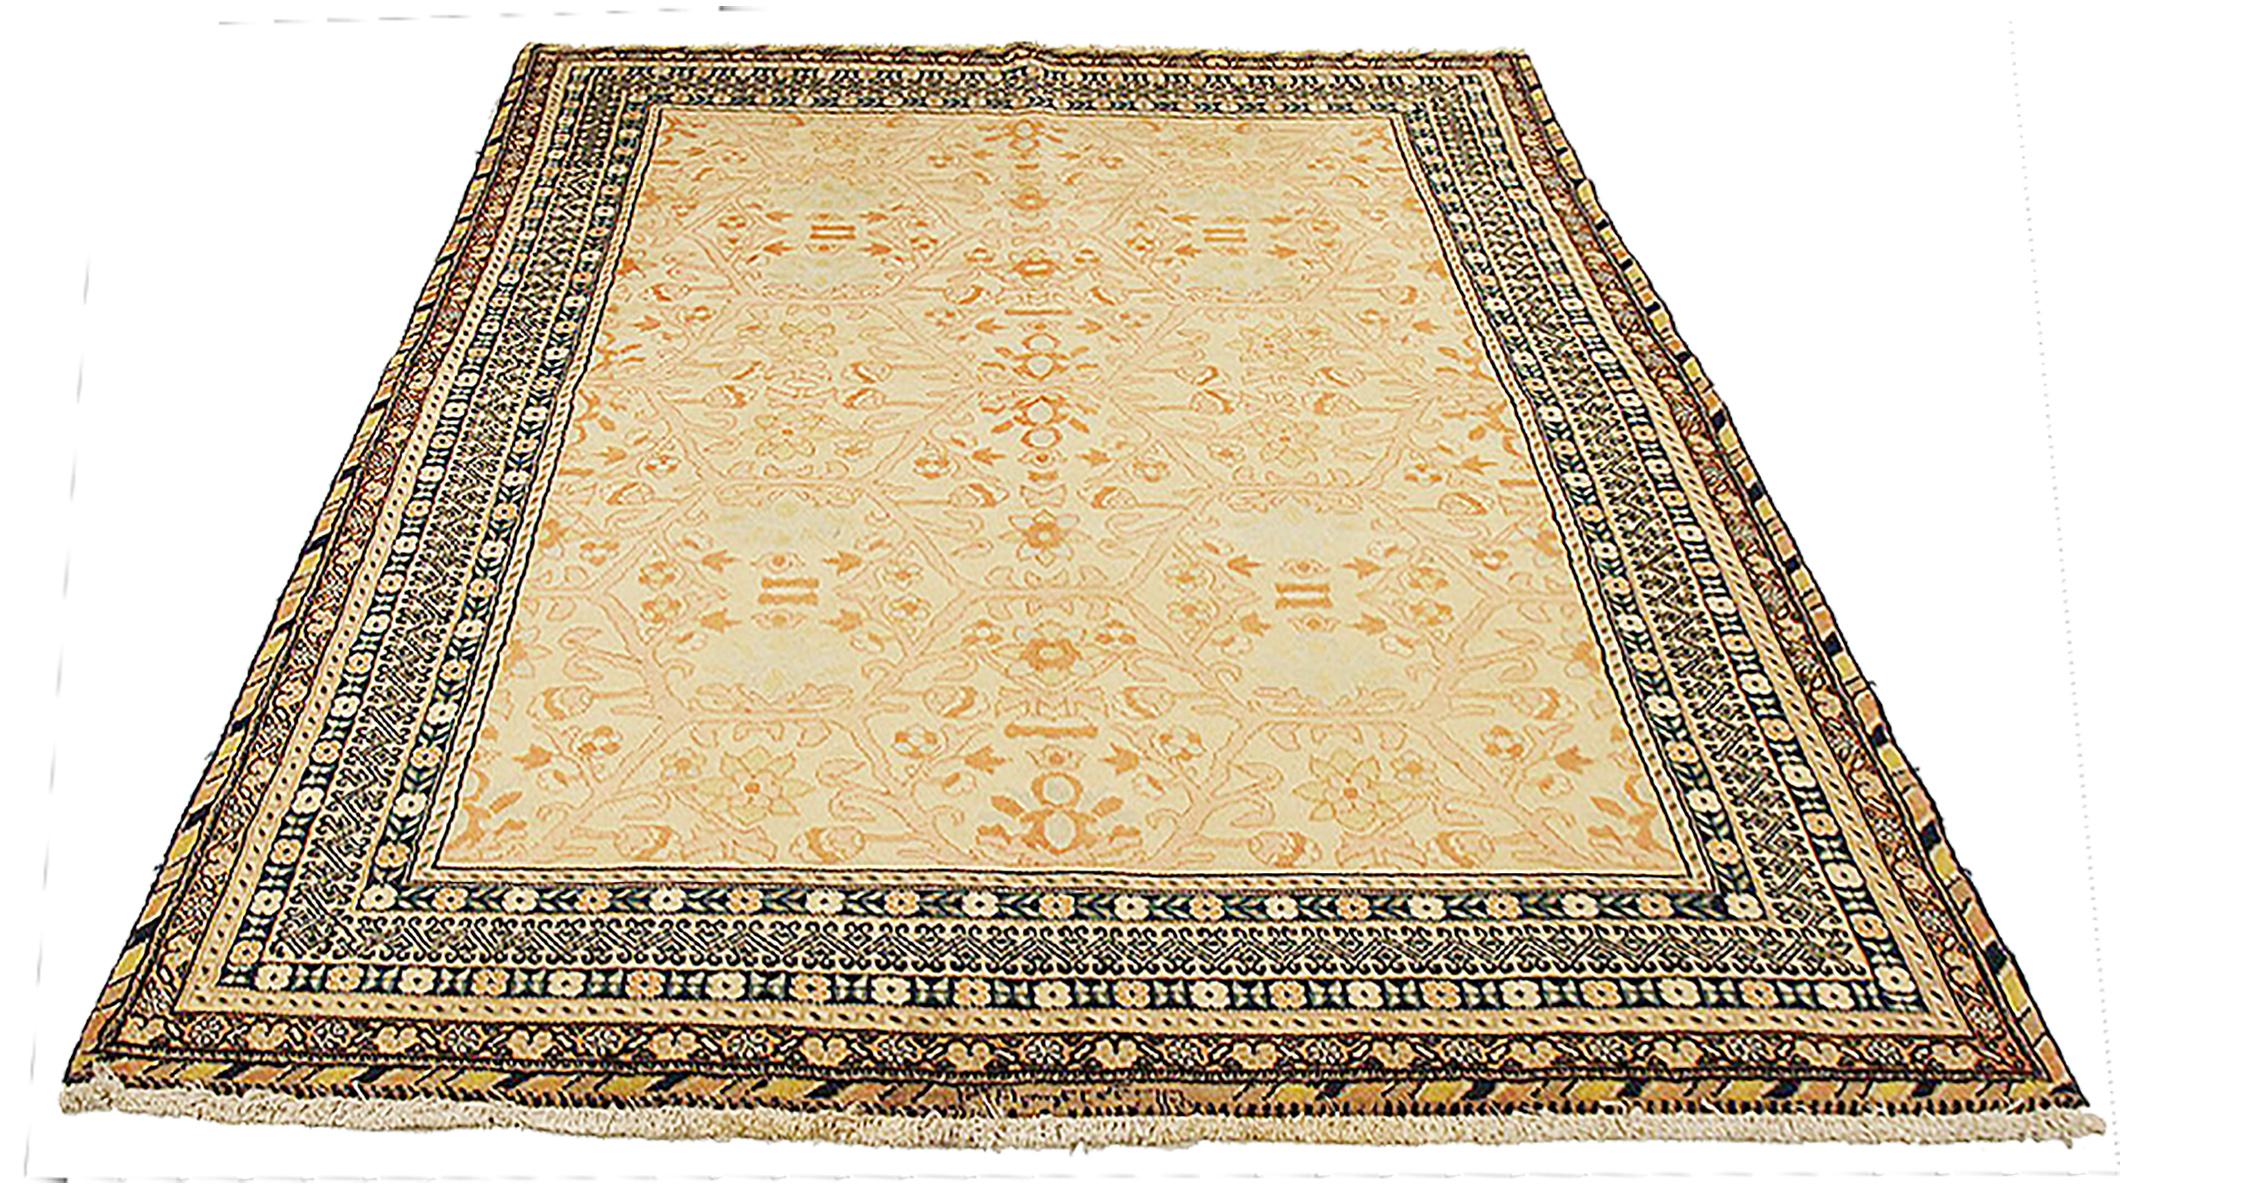 Antique Persian rug handwoven from the finest sheep’s wool and colored with all-natural vegetable dyes that are safe for humans and pets. It’s a traditional Bakhtiar design highlighted by colored diamonds over an ivory field. It’s a beautiful piece